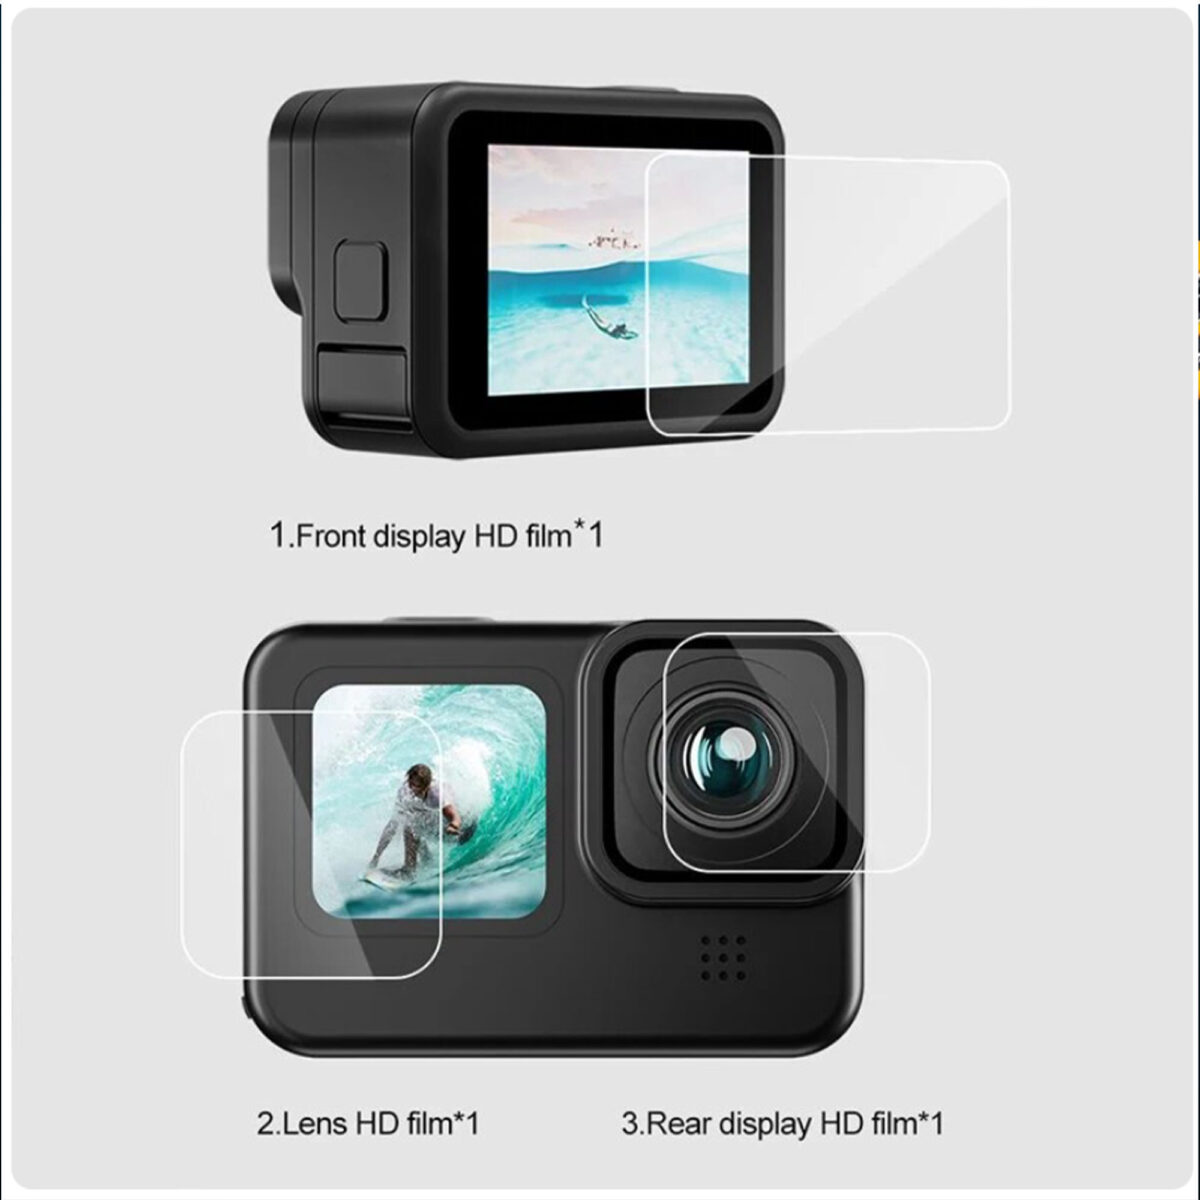 TELESIN Tempered Glass Lens + Screen Protectors for GoPro 9/10TELESIN Tempered Glass Lens + Screen Protectors for GoPro 9/10TELESIN Tempered Glass Lens + Screen Protectors for GoPro 9/10TELESIN Tempered Glass Lens + Screen Protectors for GoPro 9/10TELESIN Tempered Glass Lens + Screen Protectors for GoPro 9/10TELESIN Tempered Glass Lens + Screen Protectors for GoPro 9/10TELESIN Tempered Glass Lens + Screen Protectors for GoPro 9/10TELESIN Tempered Glass Lens + Screen Protectors for GoPro 9/10